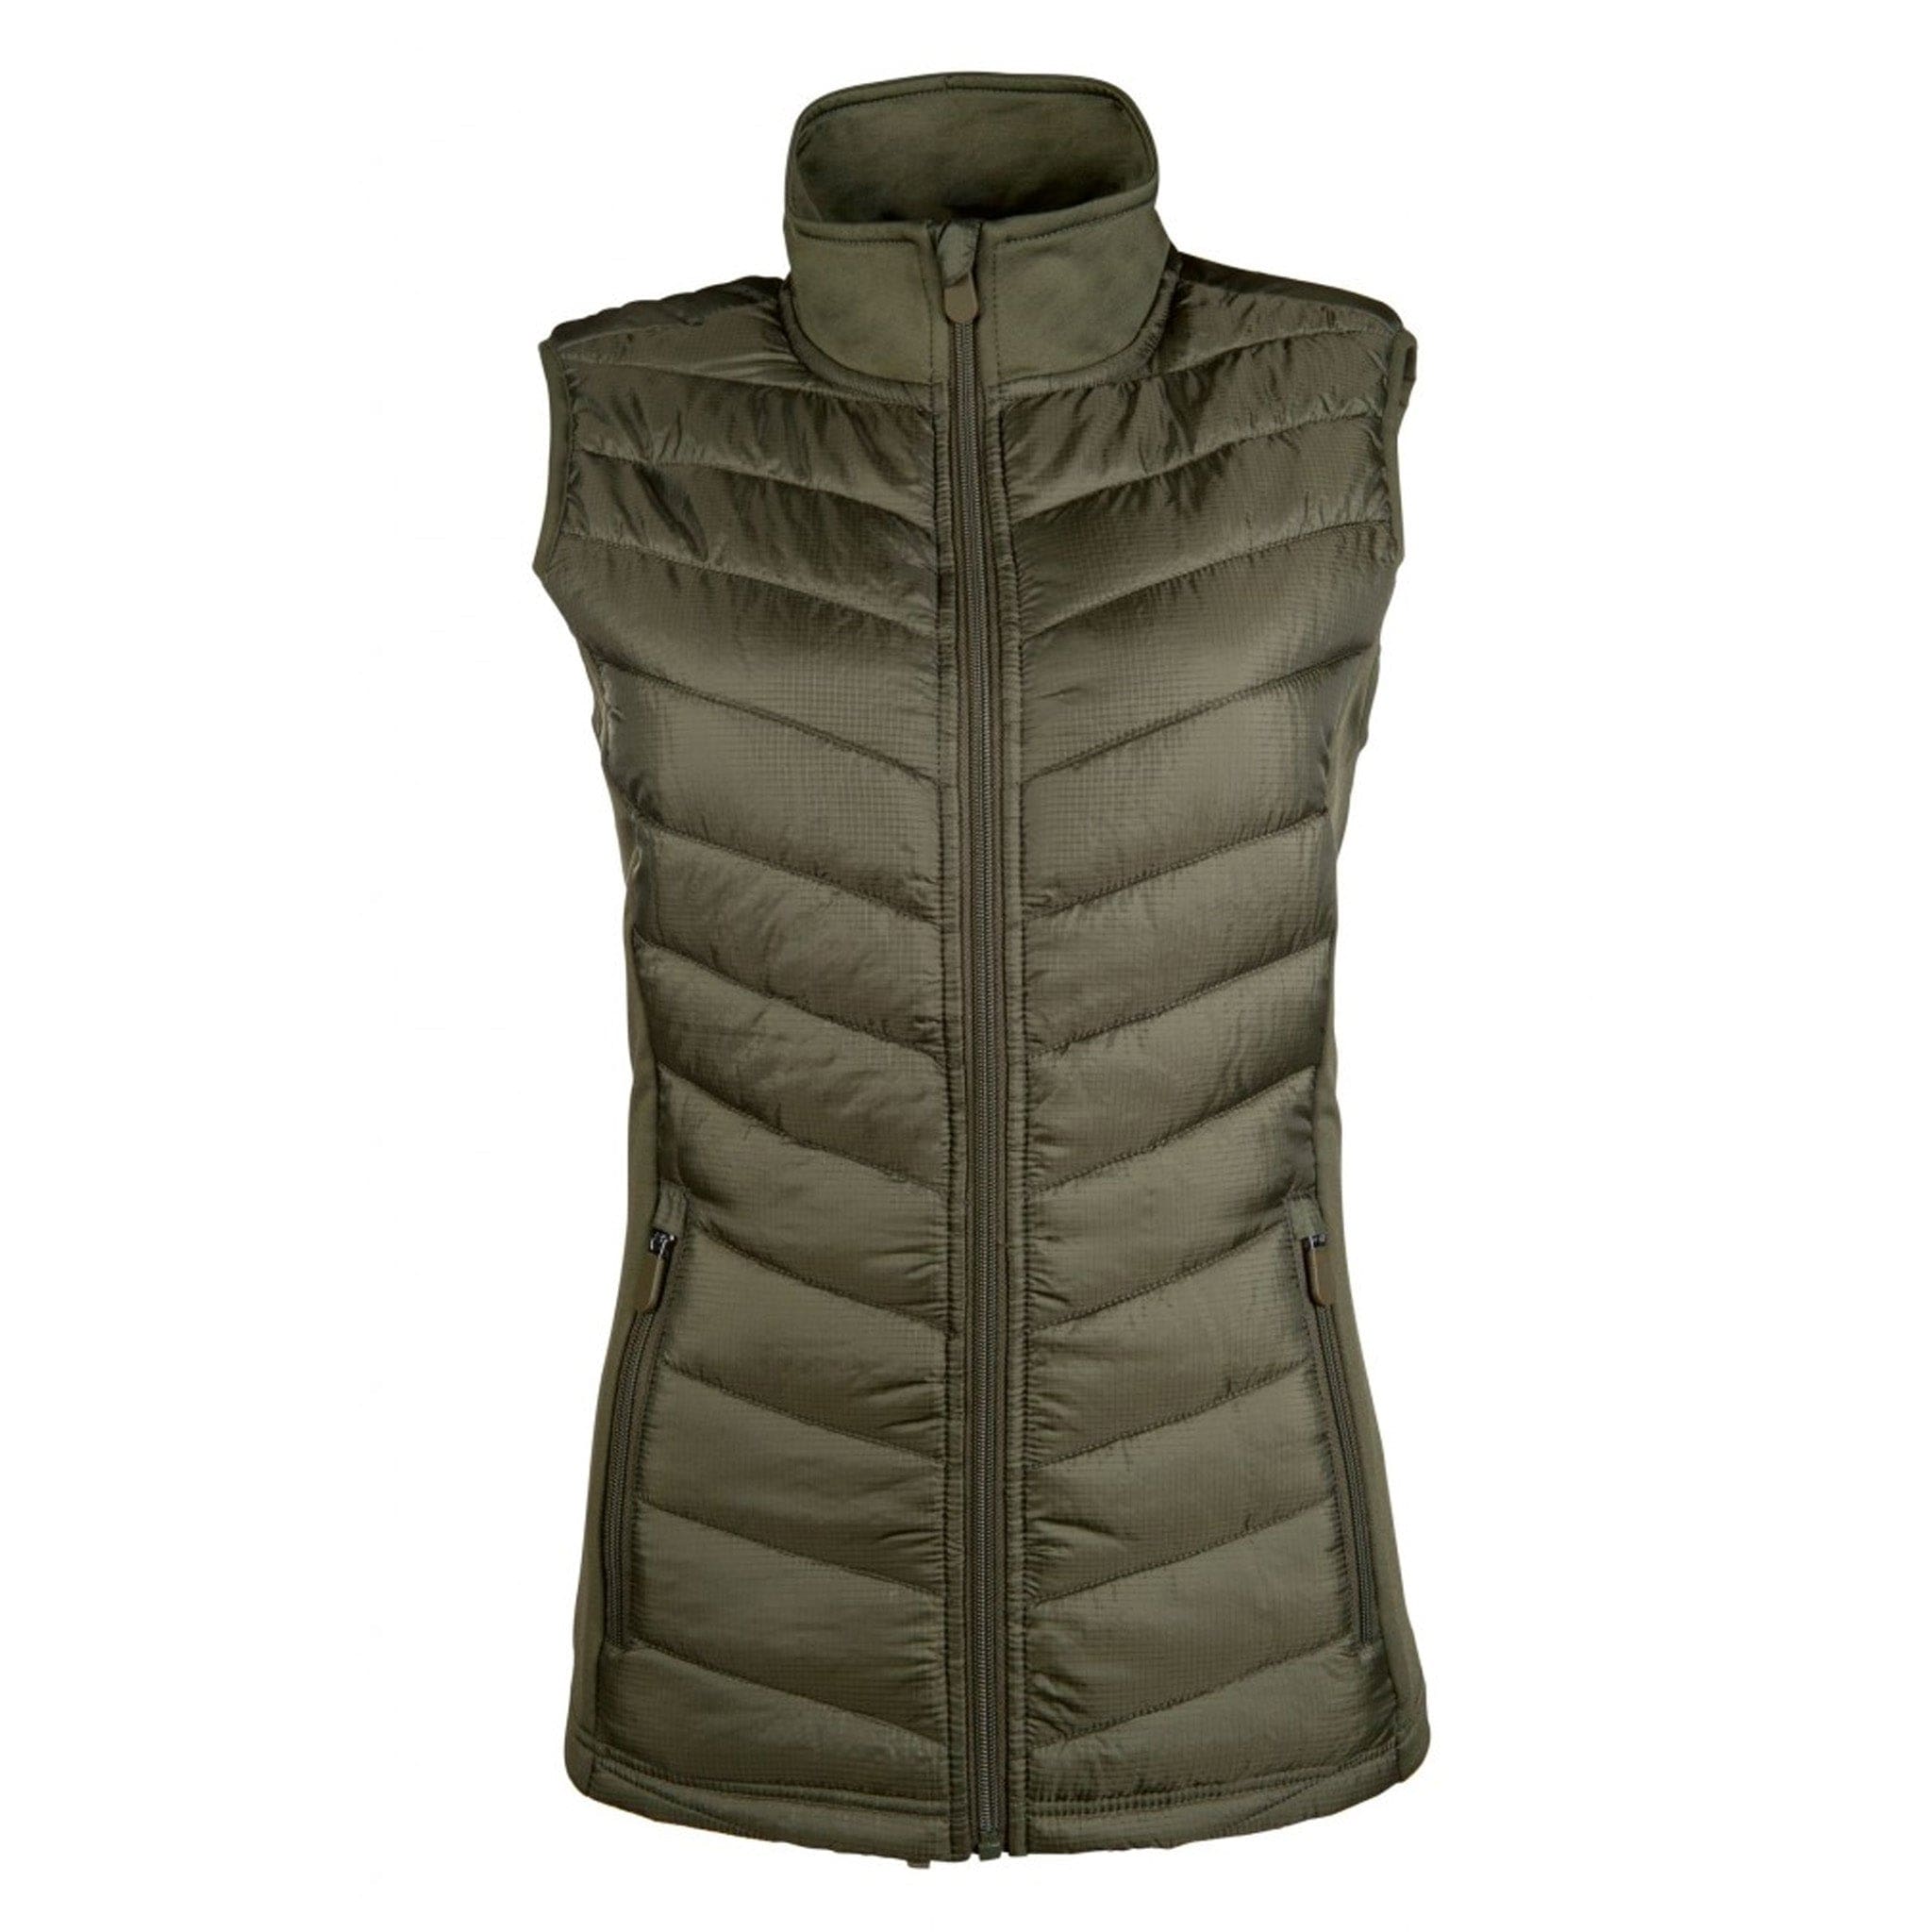 HKM Children's Style Basel Gilet 11369 Olive Green Front View